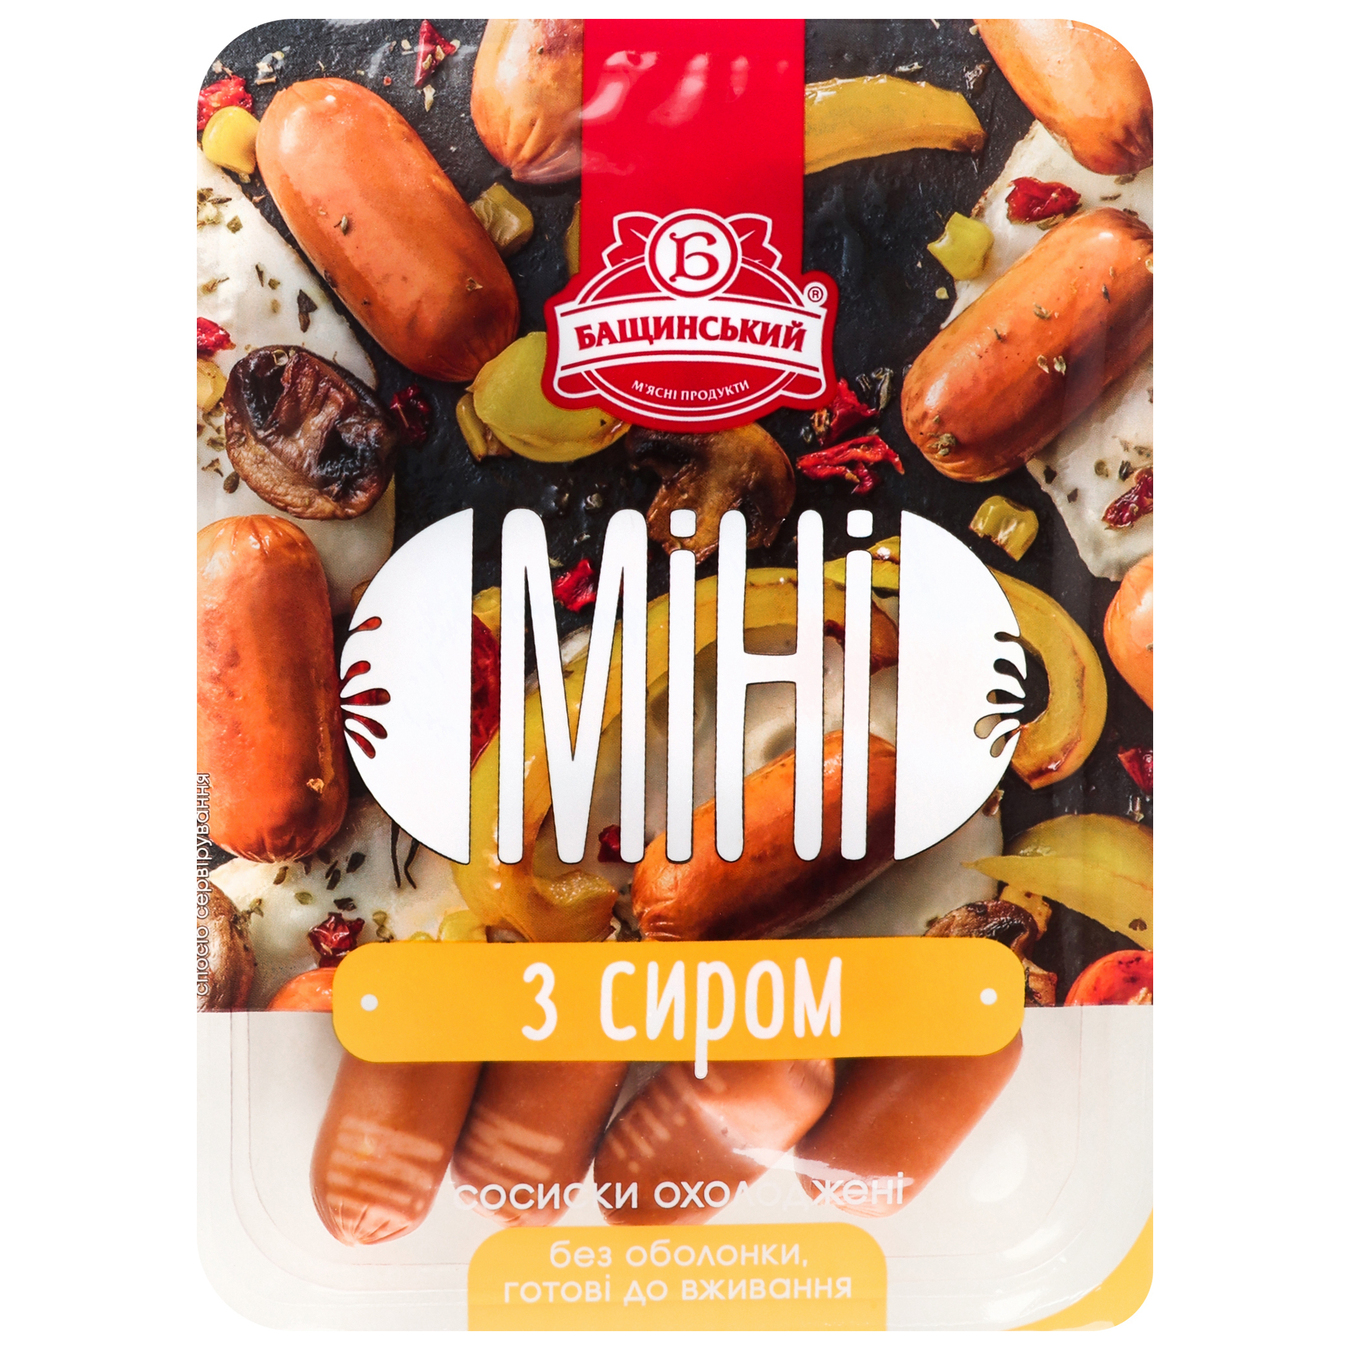 Bashchynsky mini sausages with cheese, cooked, first grade, 300g